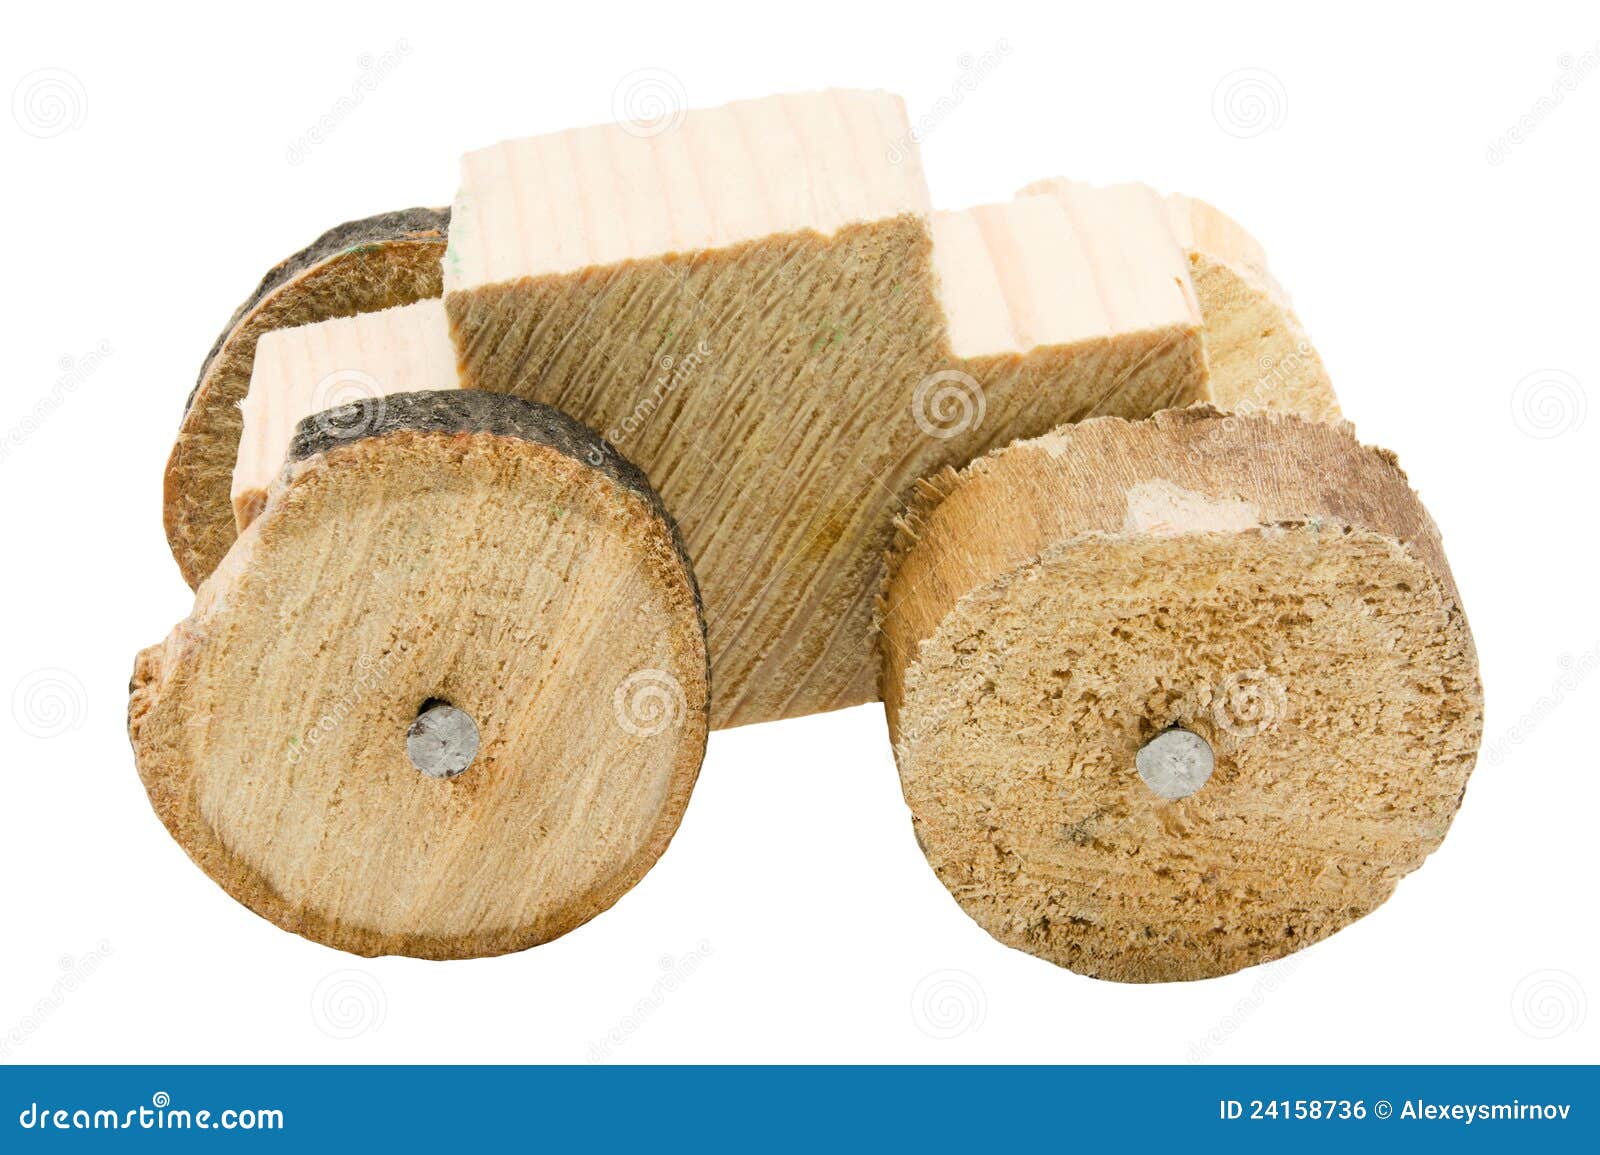 Homemade Wooden Toy Cars